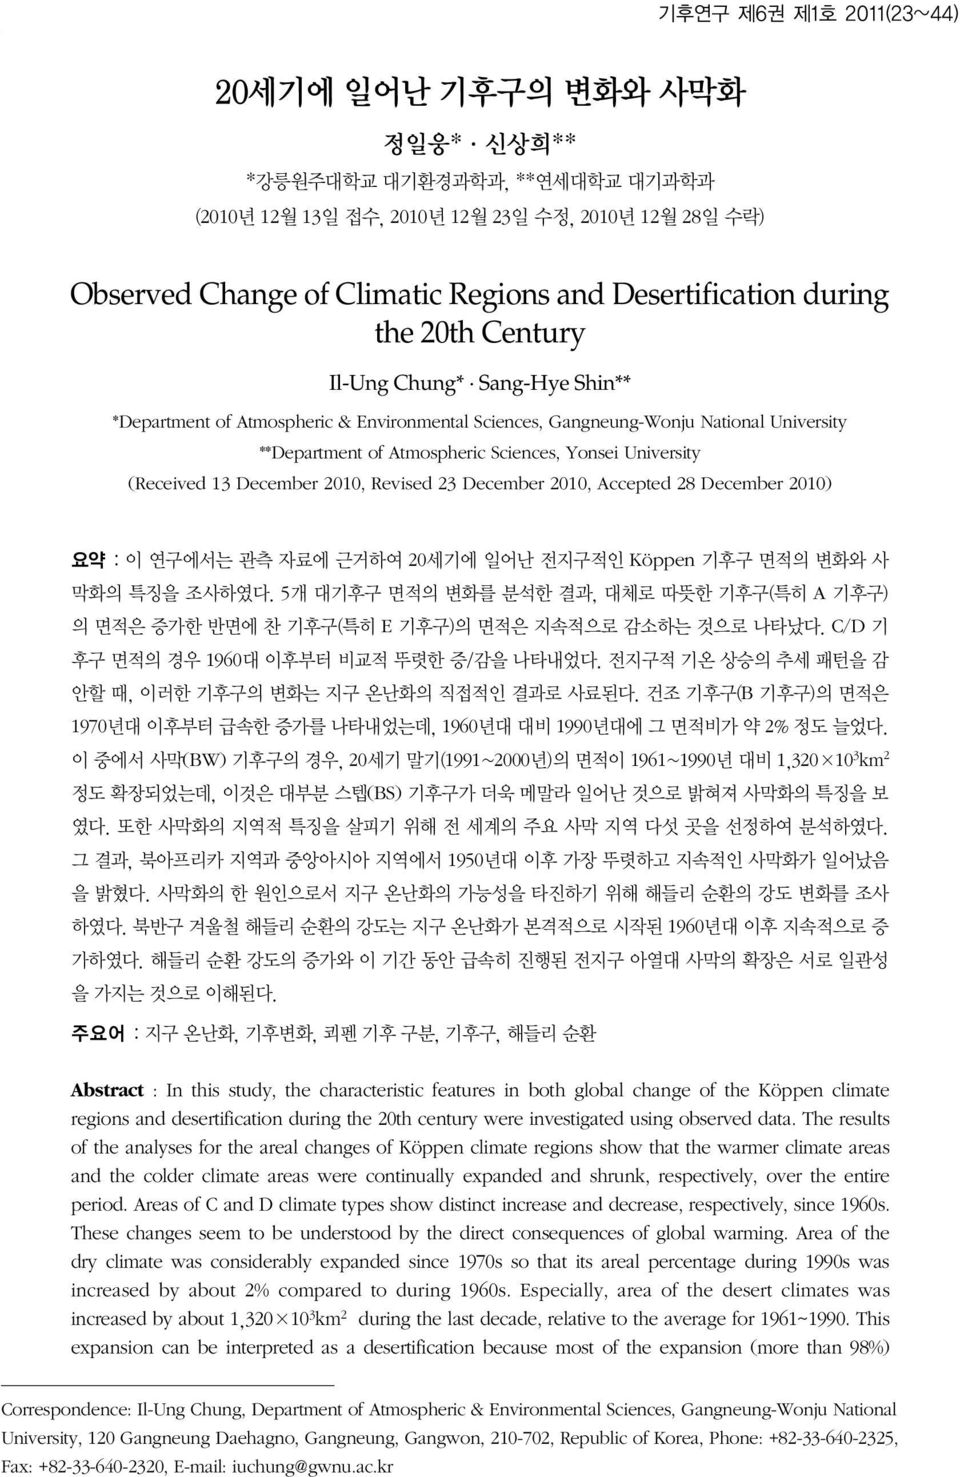 1970 1960 1990 2 (BW) 20 1991 2000 1961 1990 1 320 10 3 km 2 (BS) 1950 1960 Abstract : In this study, the characteristic features in both global change of the Köppen climate regions and